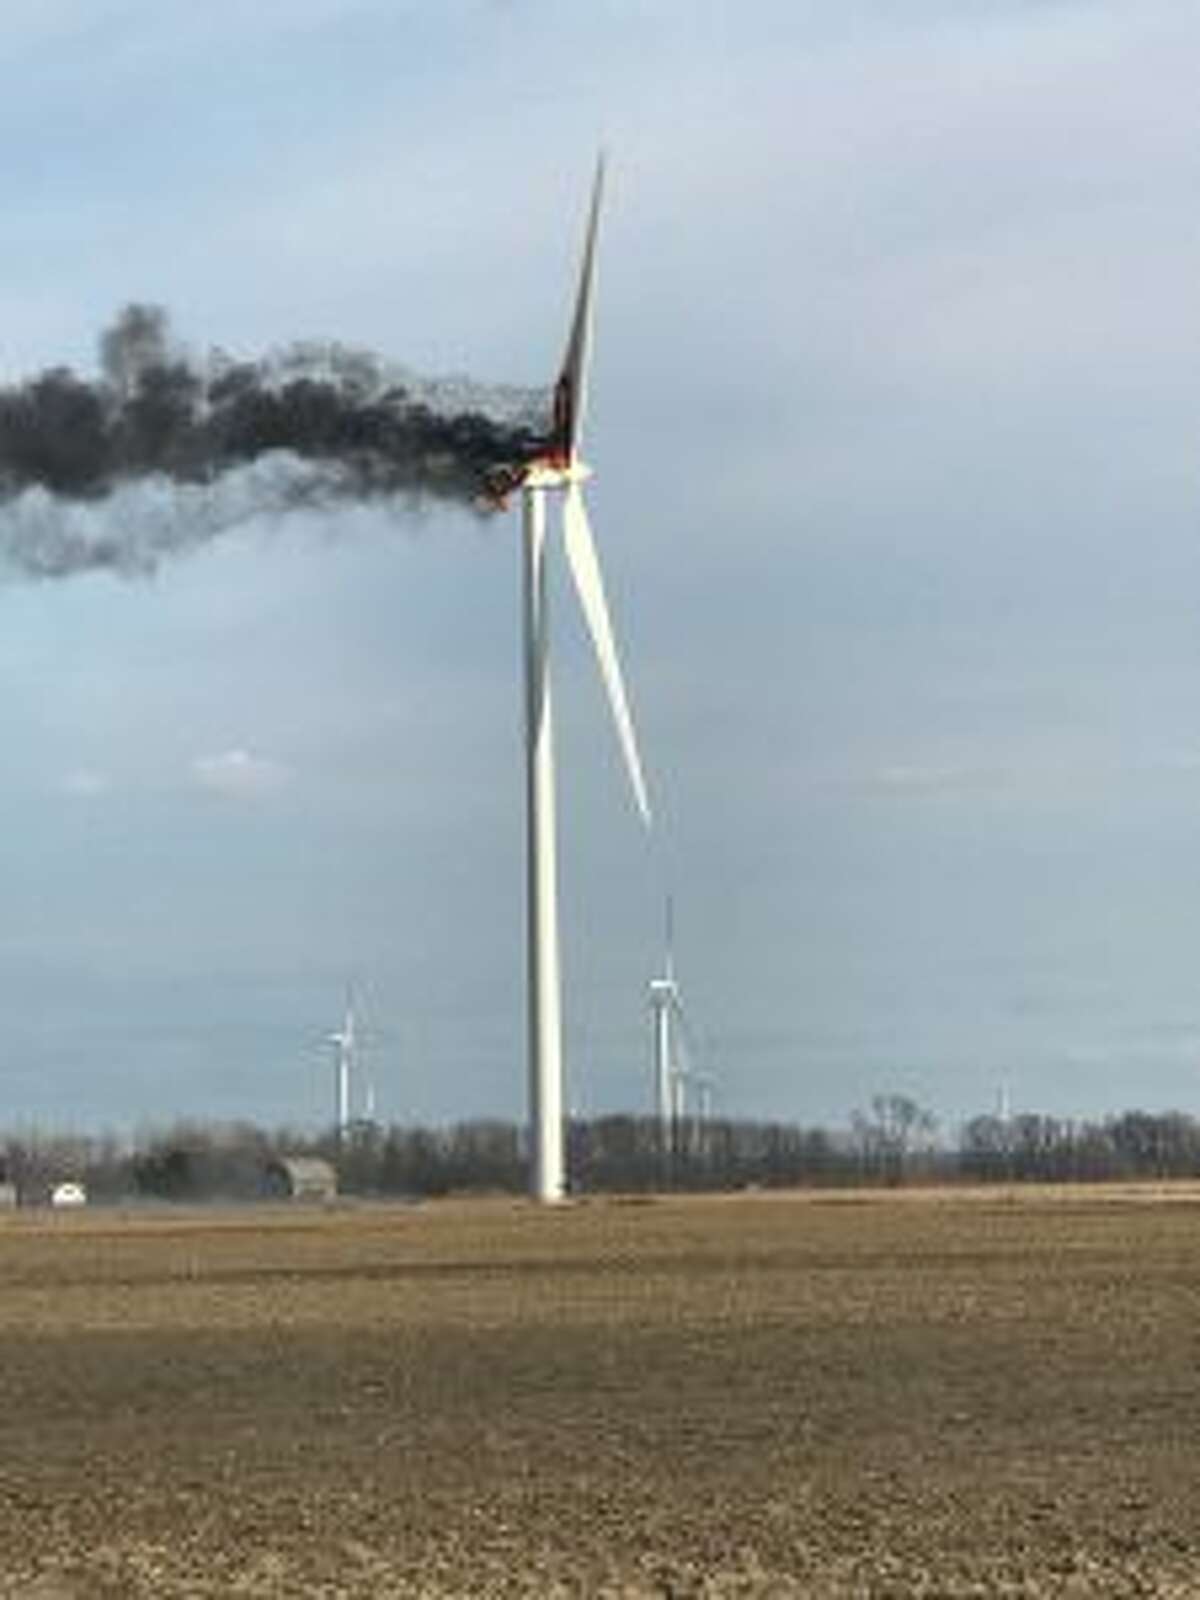 A fire burns at a wind turbine on Monday, April 1, 2019, near Elkton, Mich. The fire drew spectators who watched flaming debris fall to the ground, but no injuries were reported. Crews let the fire burn itself out. (Renee Willis/The Huron Daily Tribune via AP)